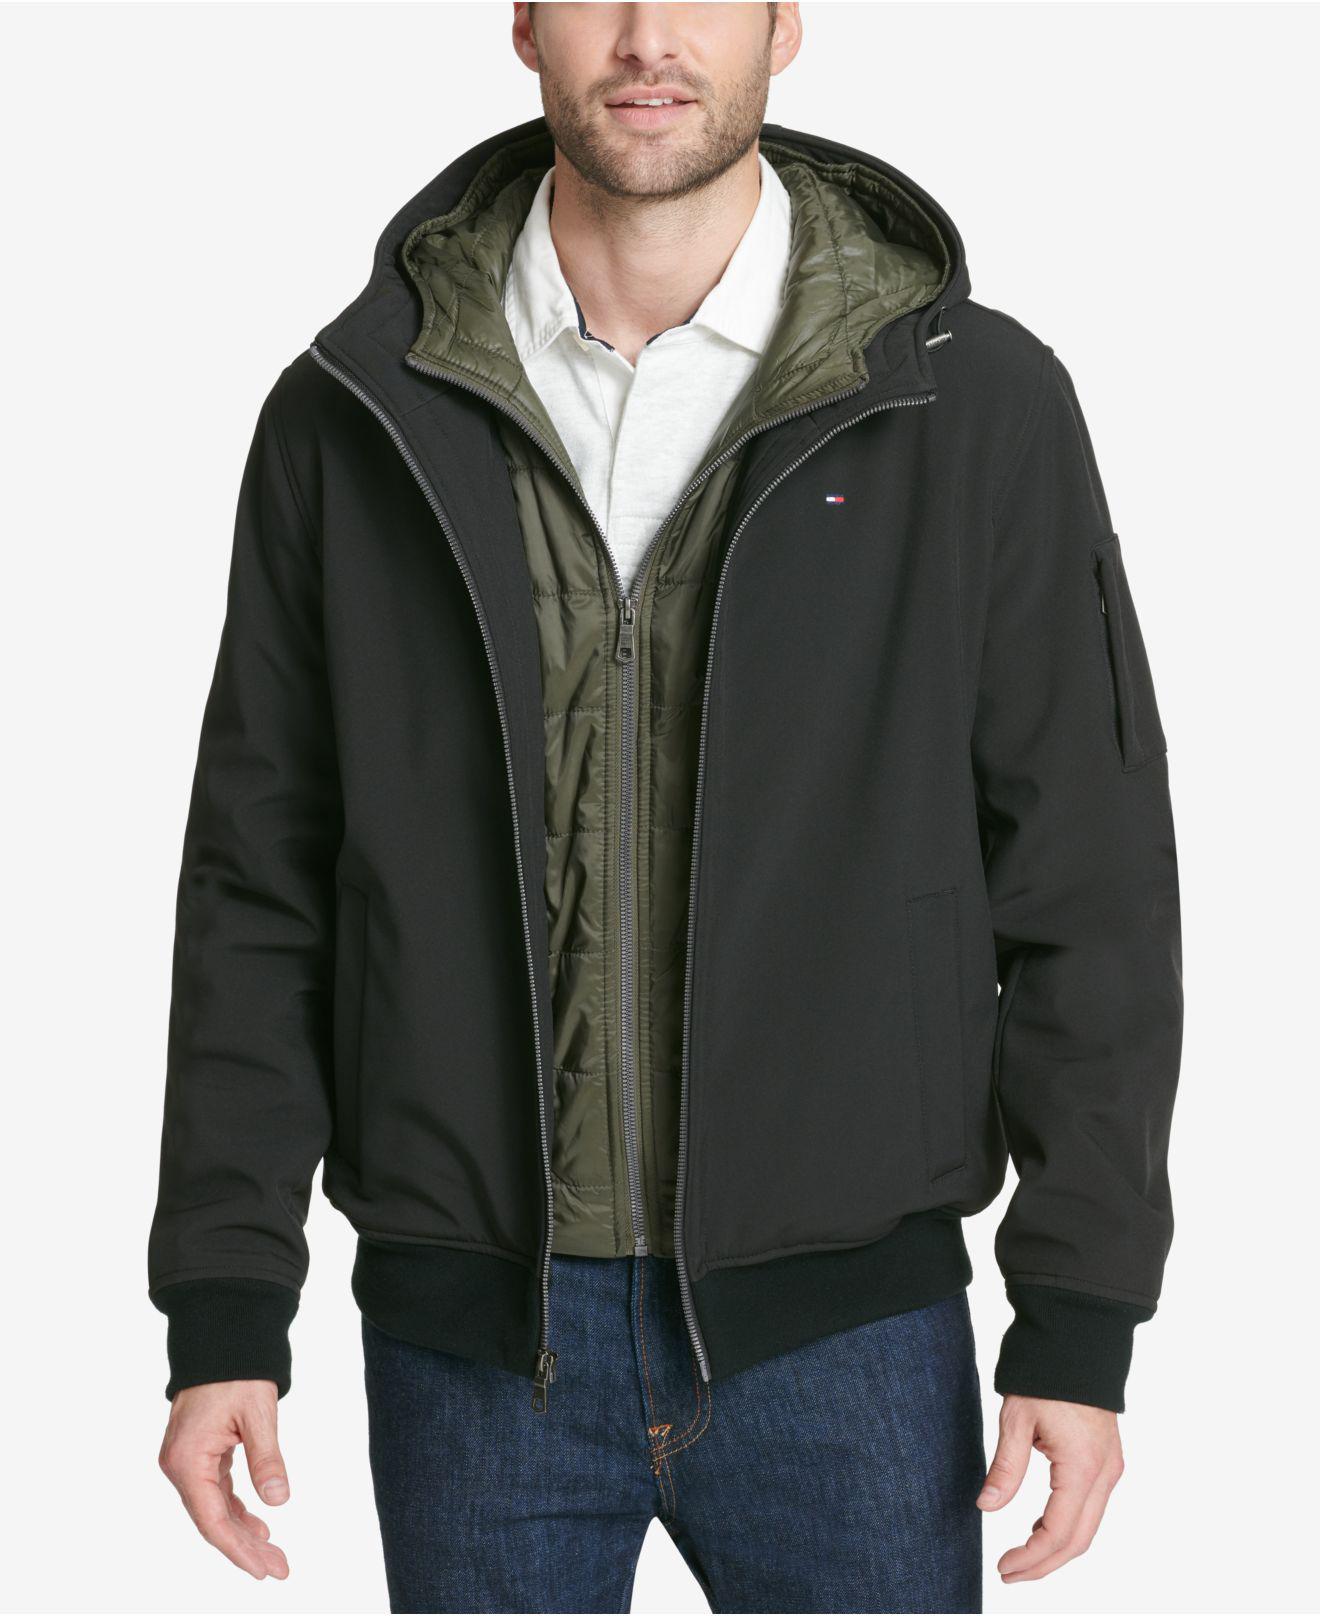 Tommy Hilfiger Synthetic Soft-shell Hooded Bomber Jacket With Bib in Black  for Men - Lyst